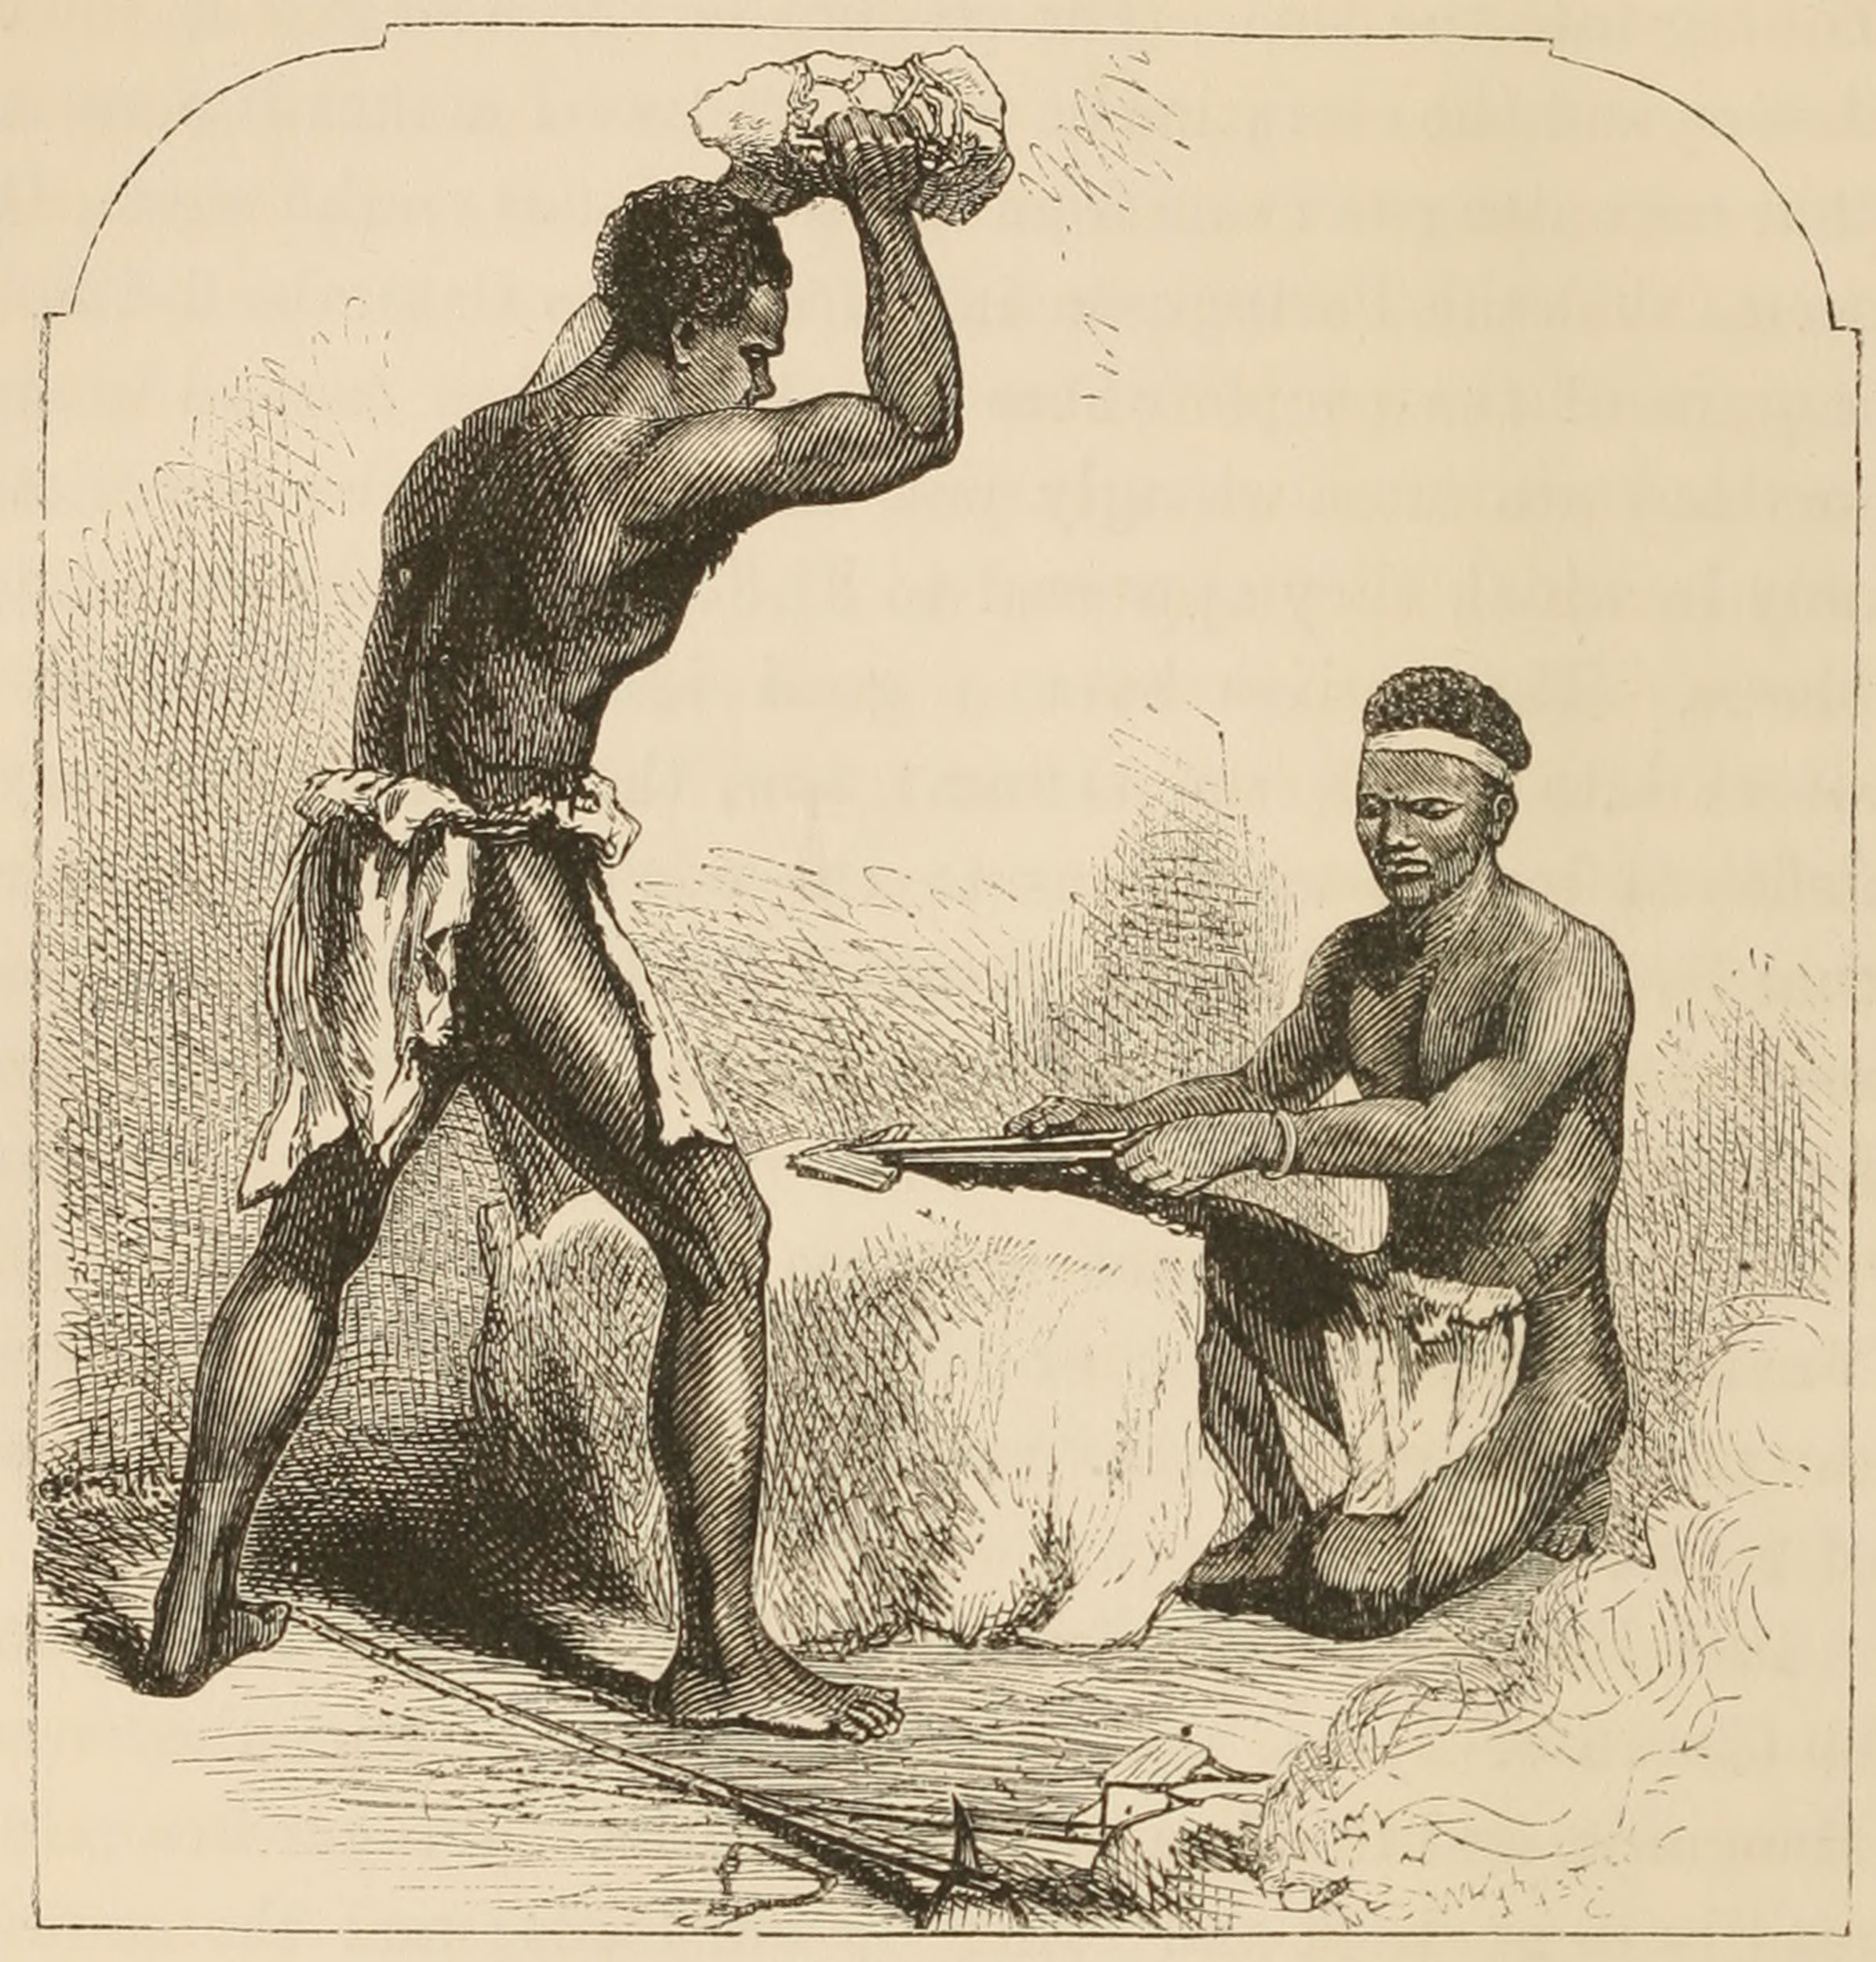 Forging Hoes. Illustration from the Last Journals (Livingstone 1874,1:146). Courtesy of Internet Archive